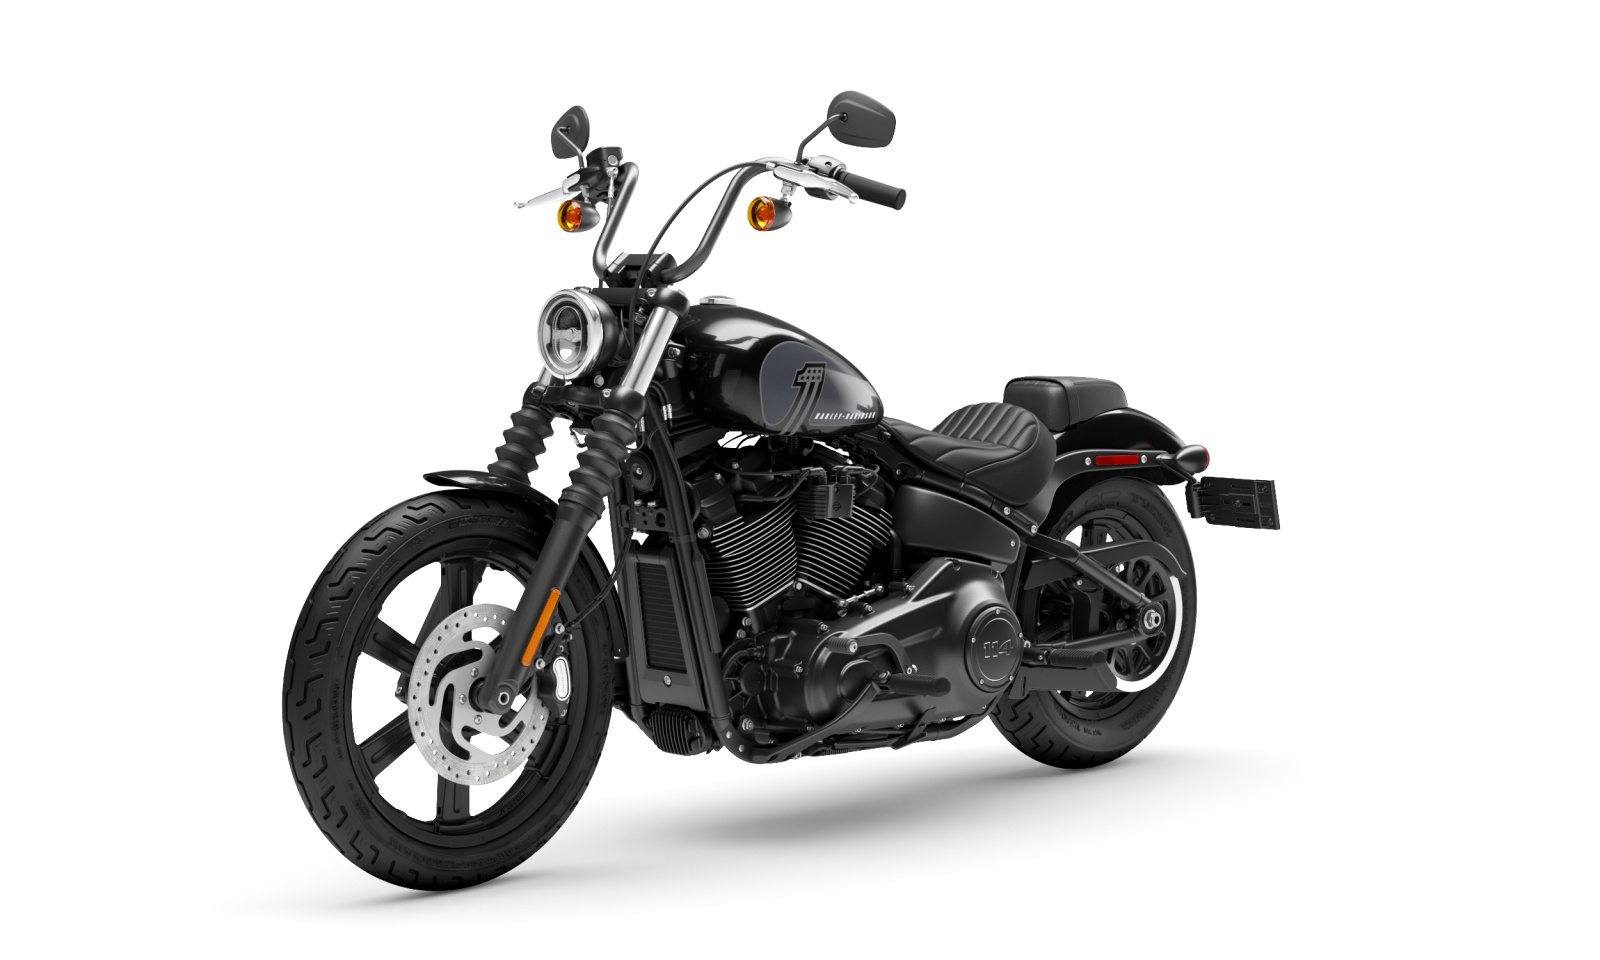 Harley-Davidson X440 Price, Images, colours, Mileage & Reviews